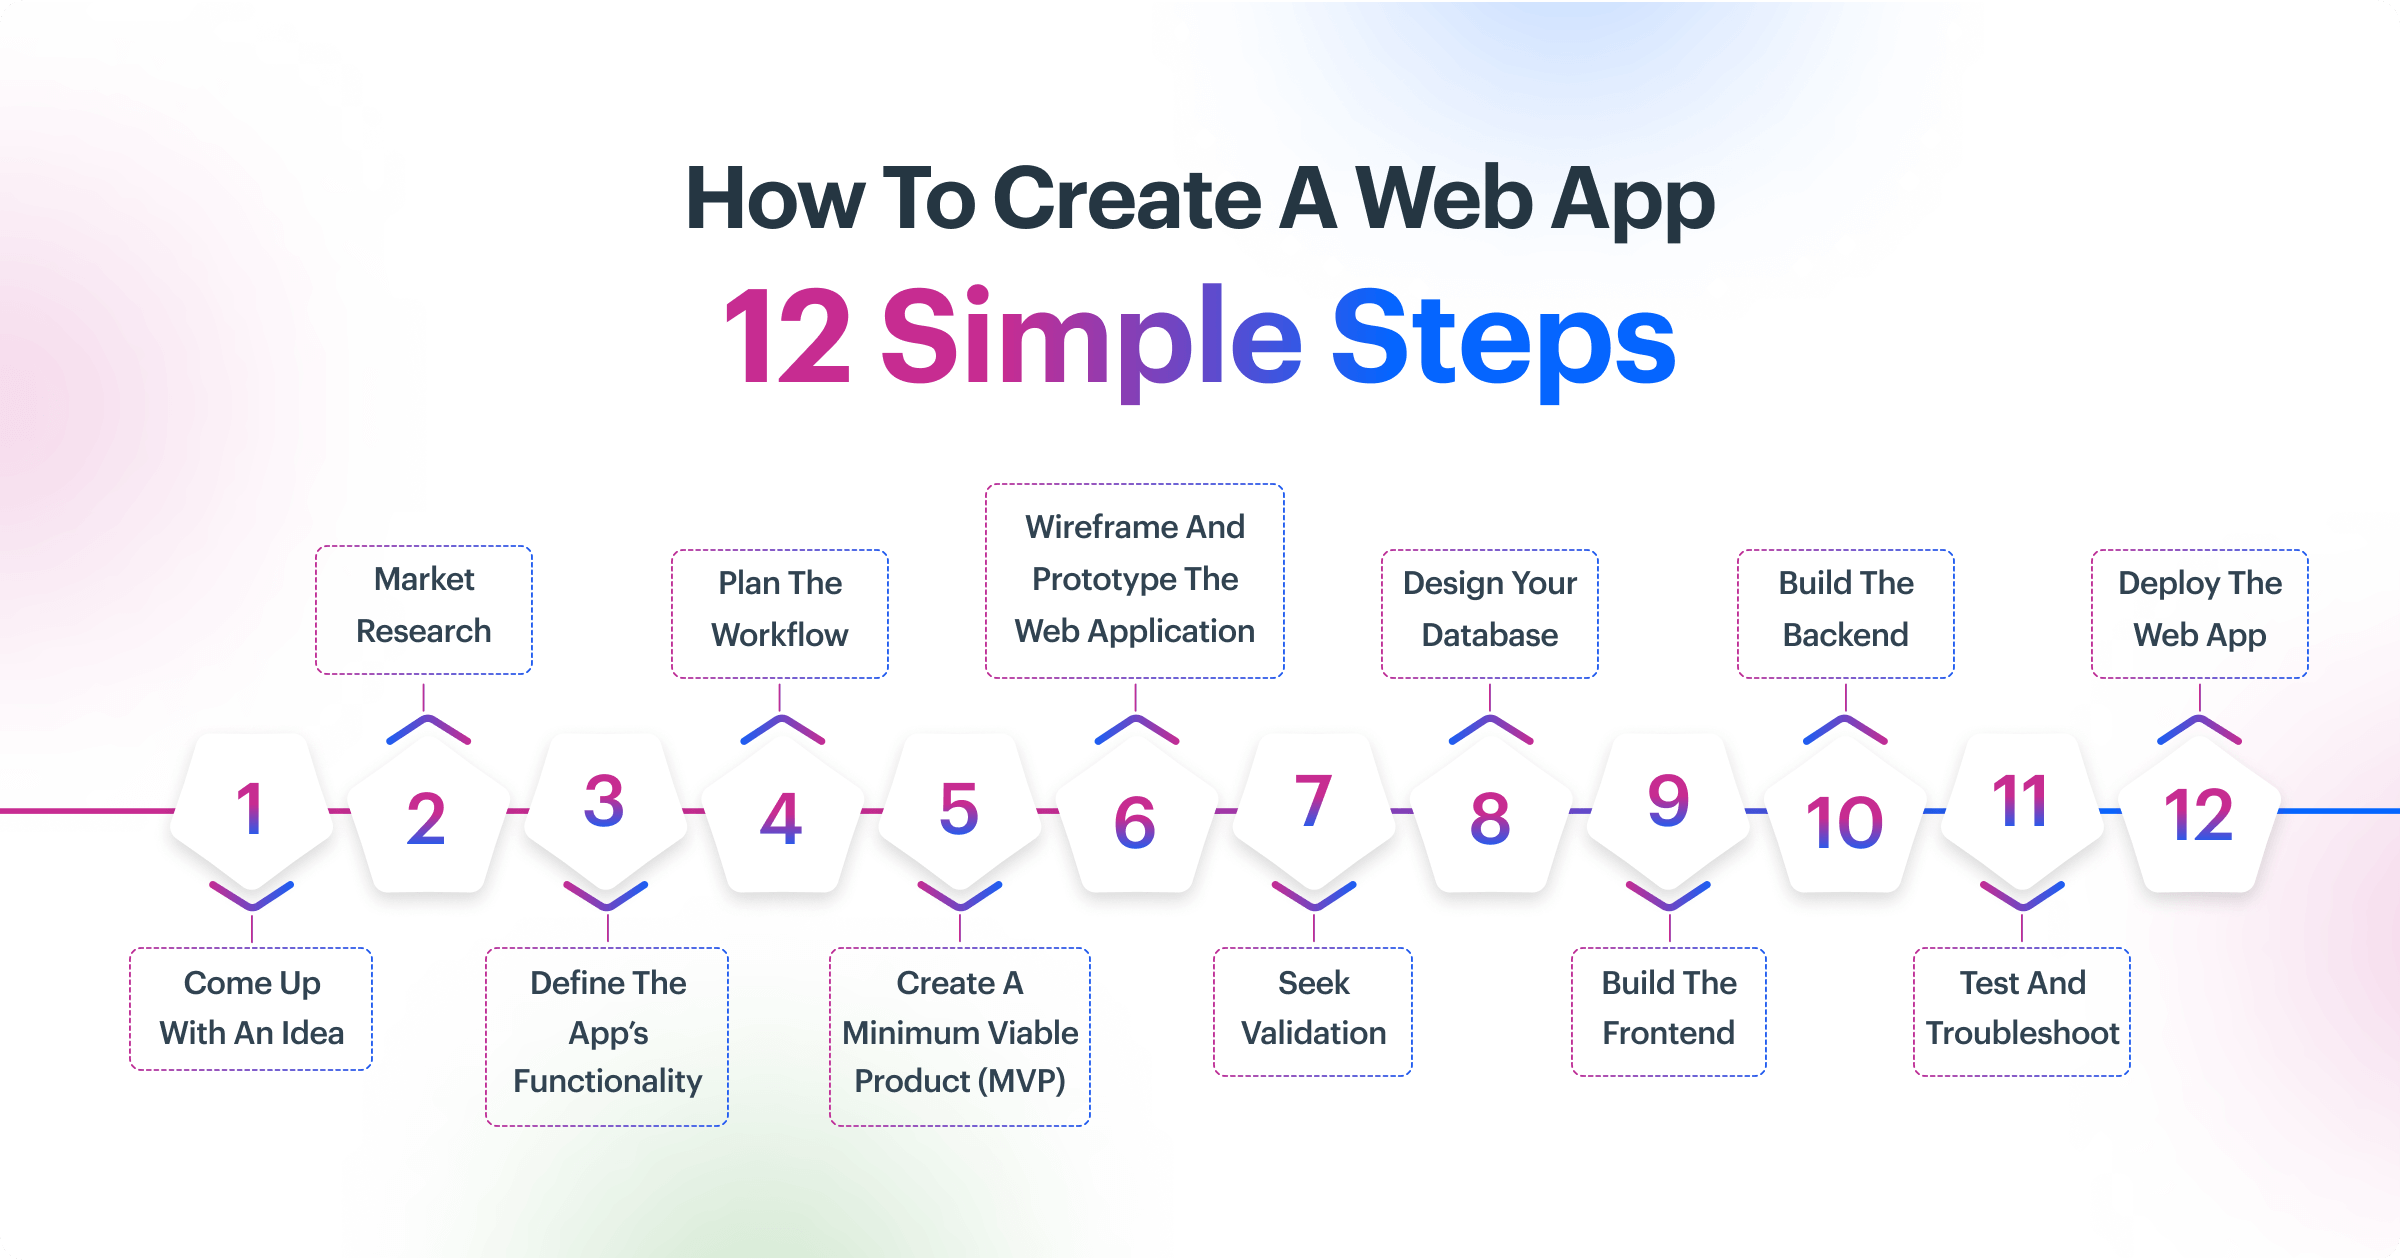 How to Design a Web Application